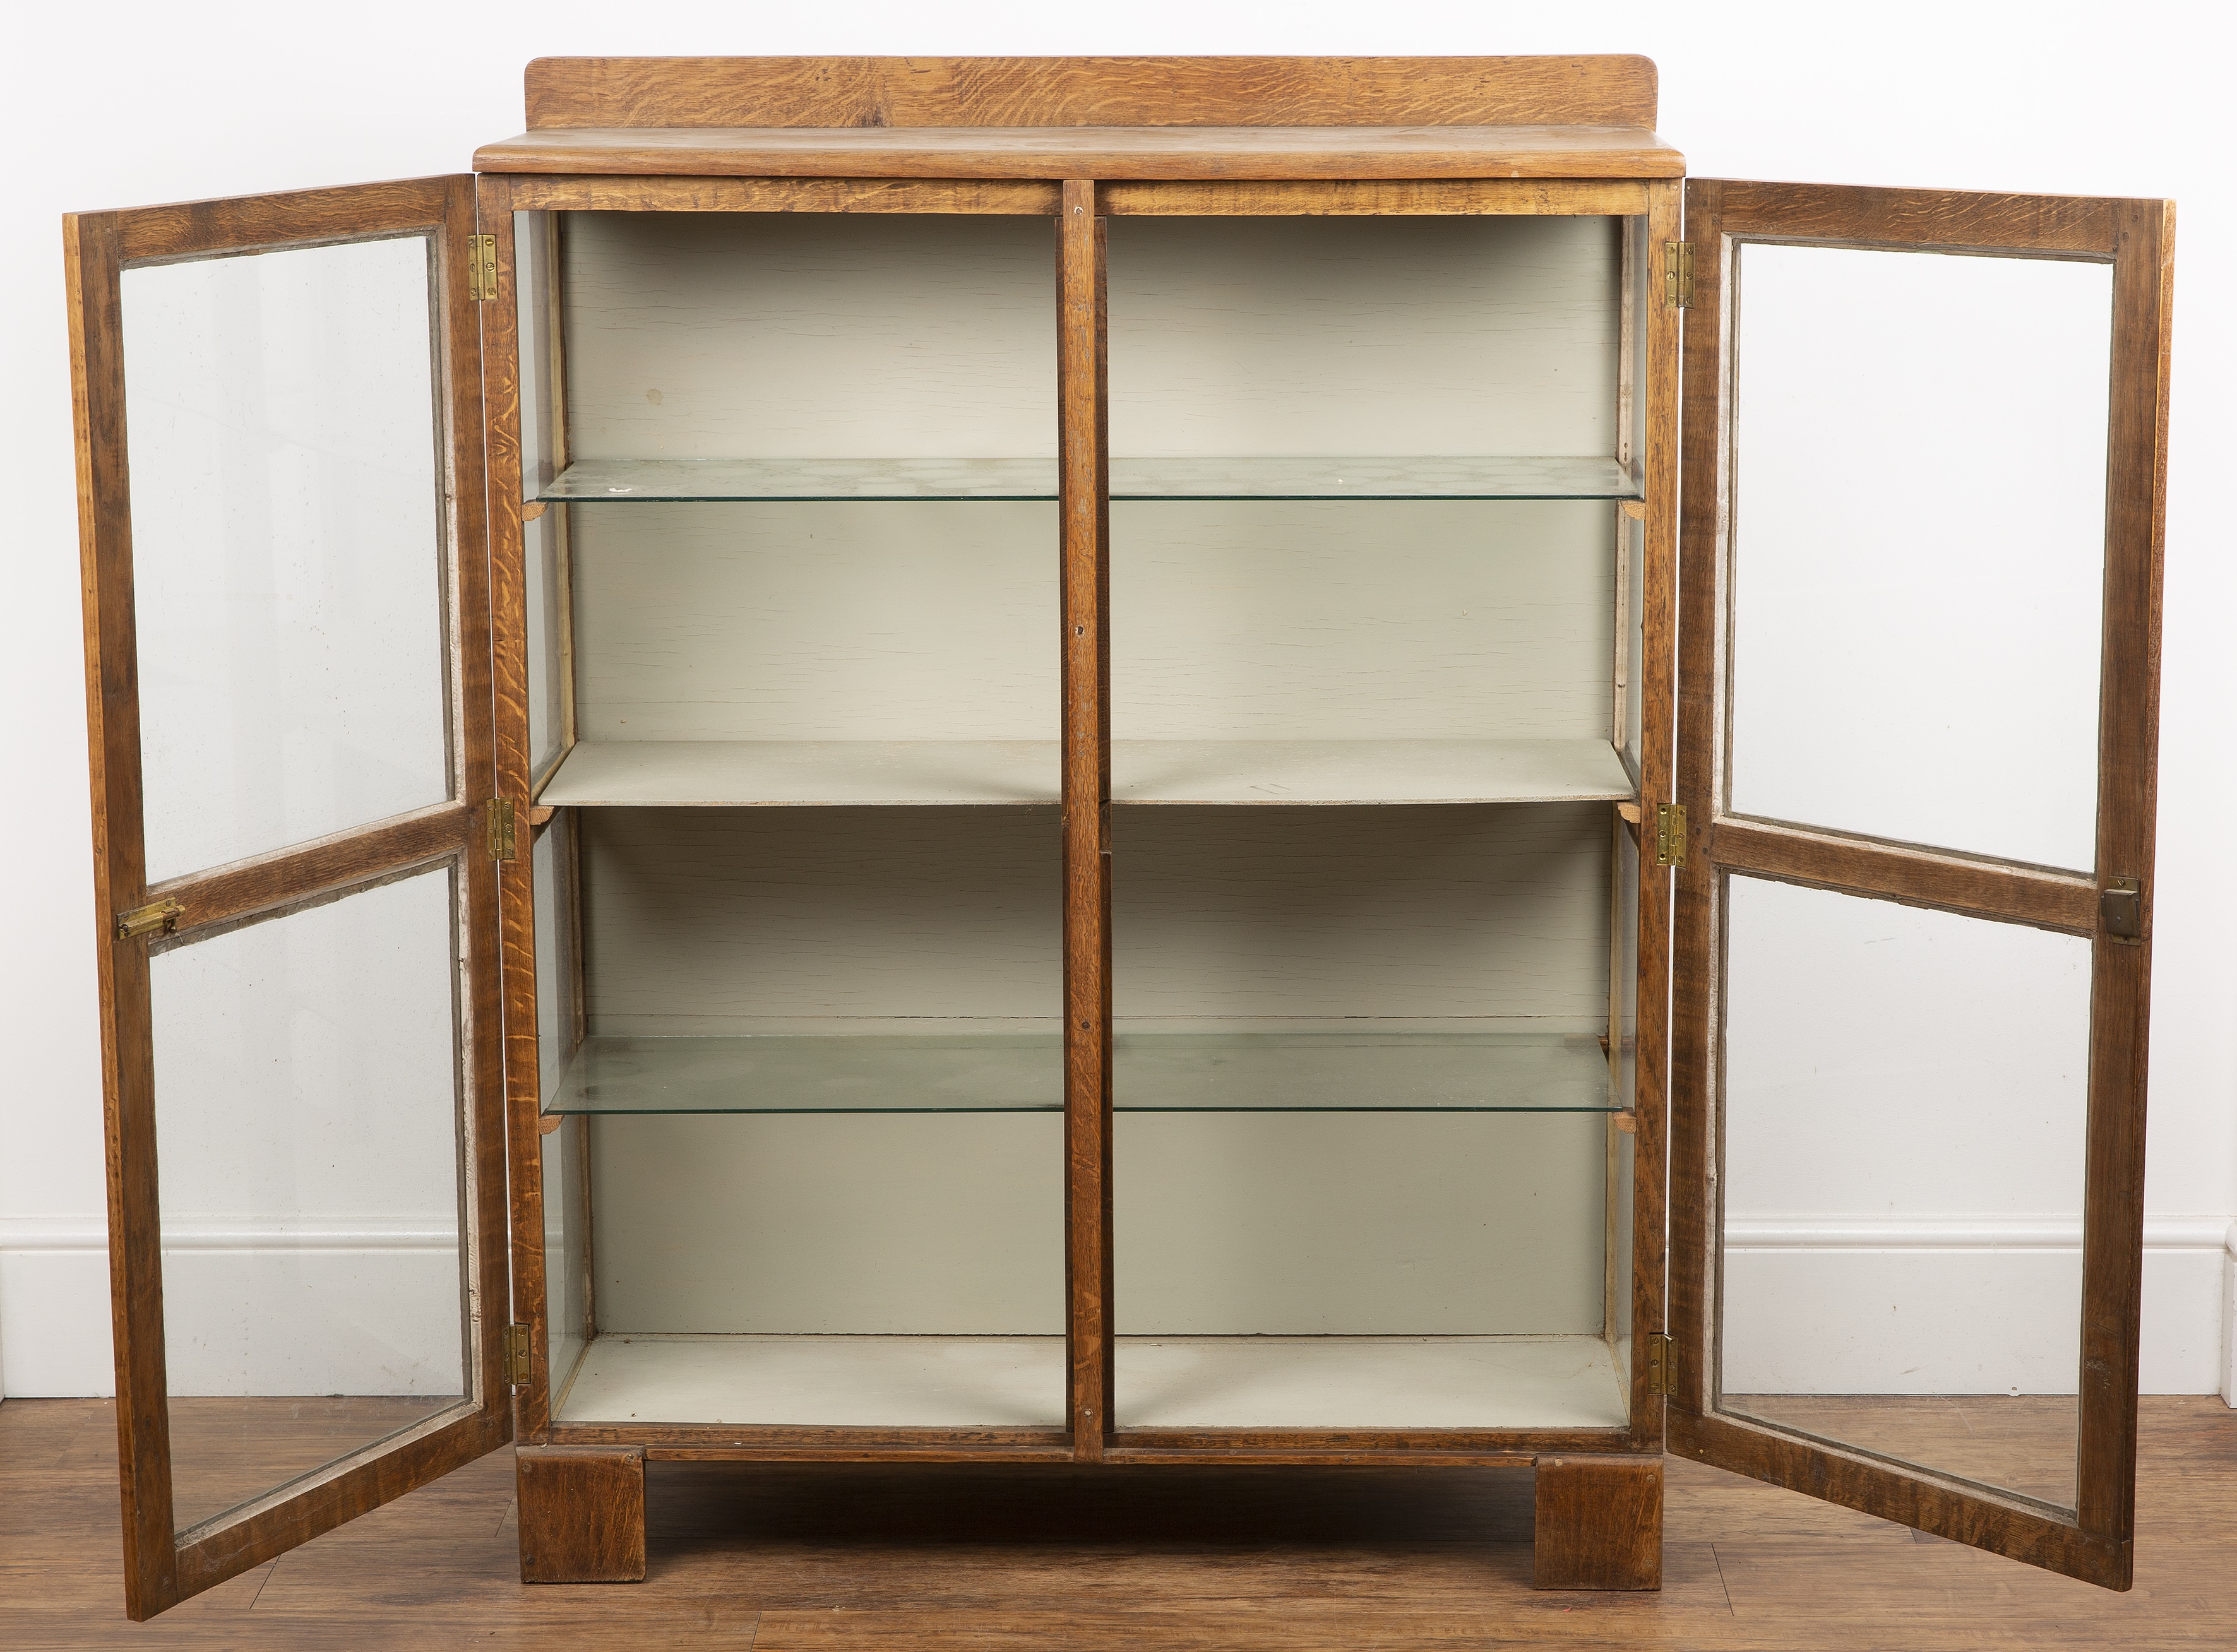 Cotswold School oak, glazed bookcase or cabinet, with galleried back above panelled doors, 95cm wide - Image 2 of 5